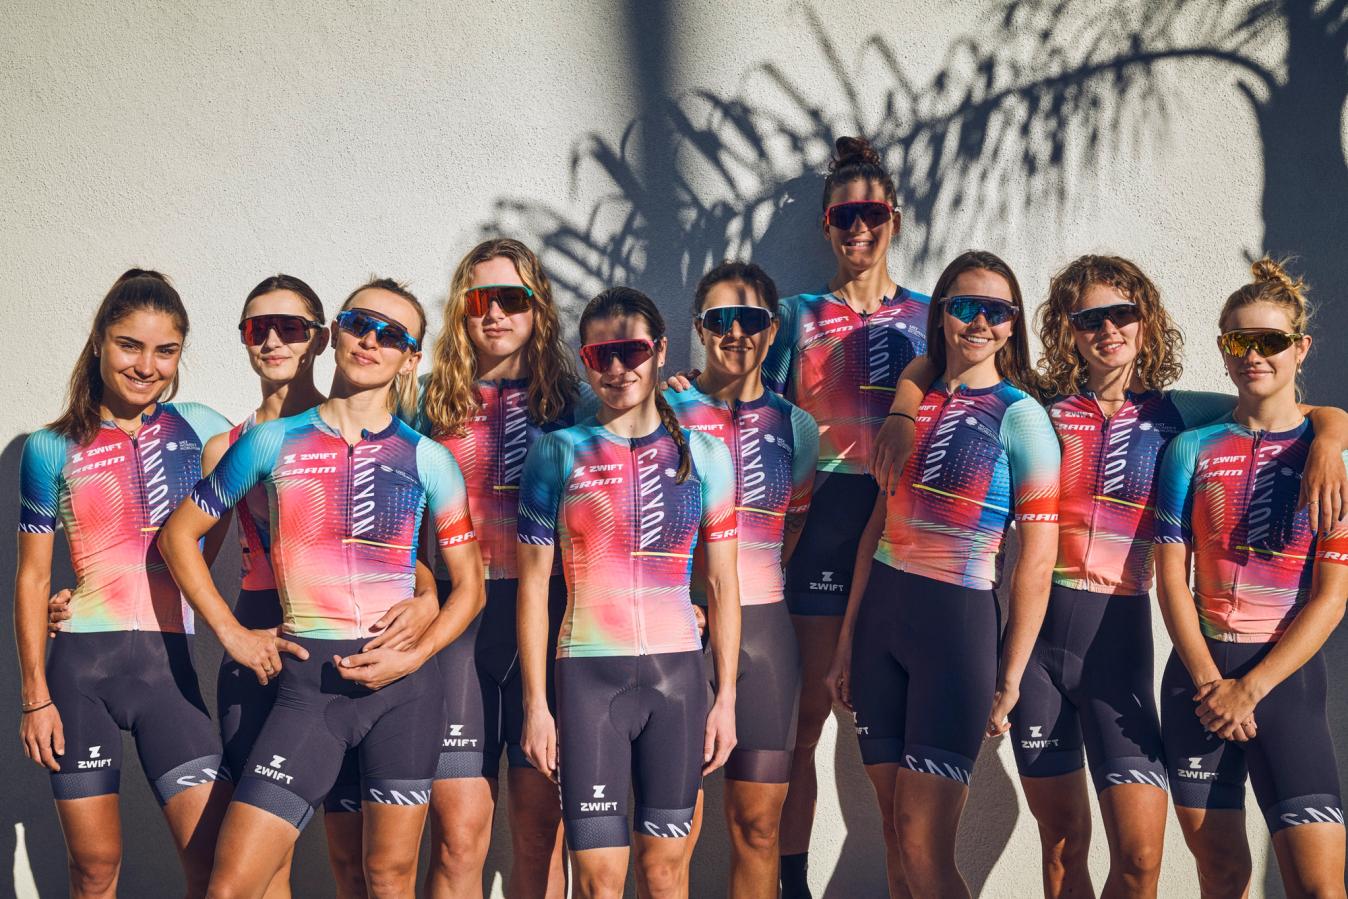 Kasia Niewadoma and her fellow Canyon-SRAM riders show off their new strip